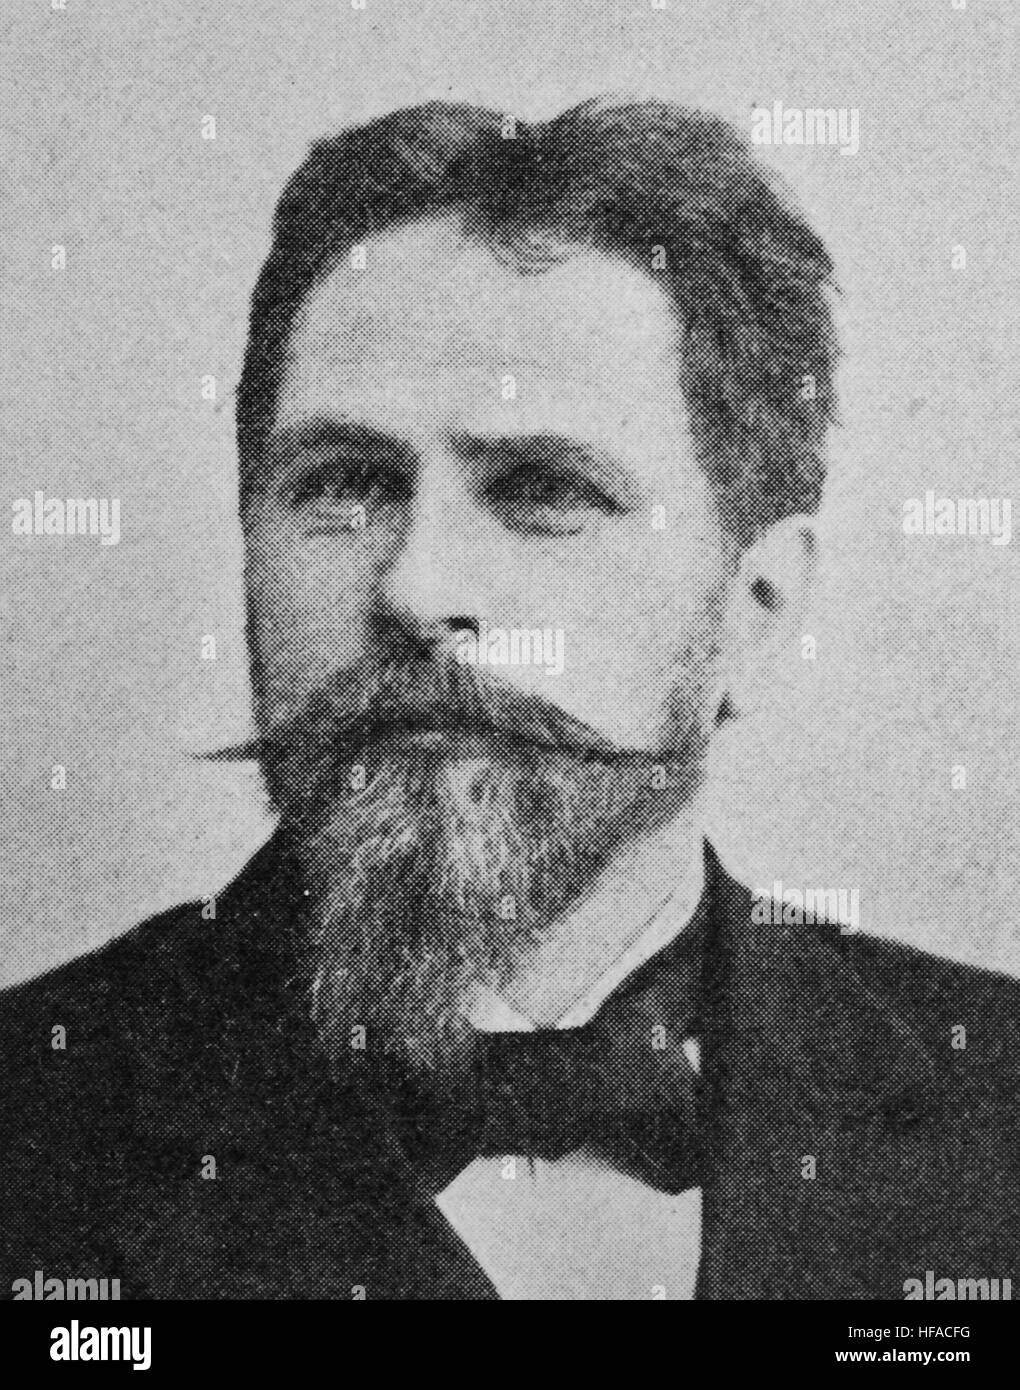 Max Rubner, 1854-1932,a German physiologist and hygienist., reproduction photo from the year 1895, digital improved Stock Photo